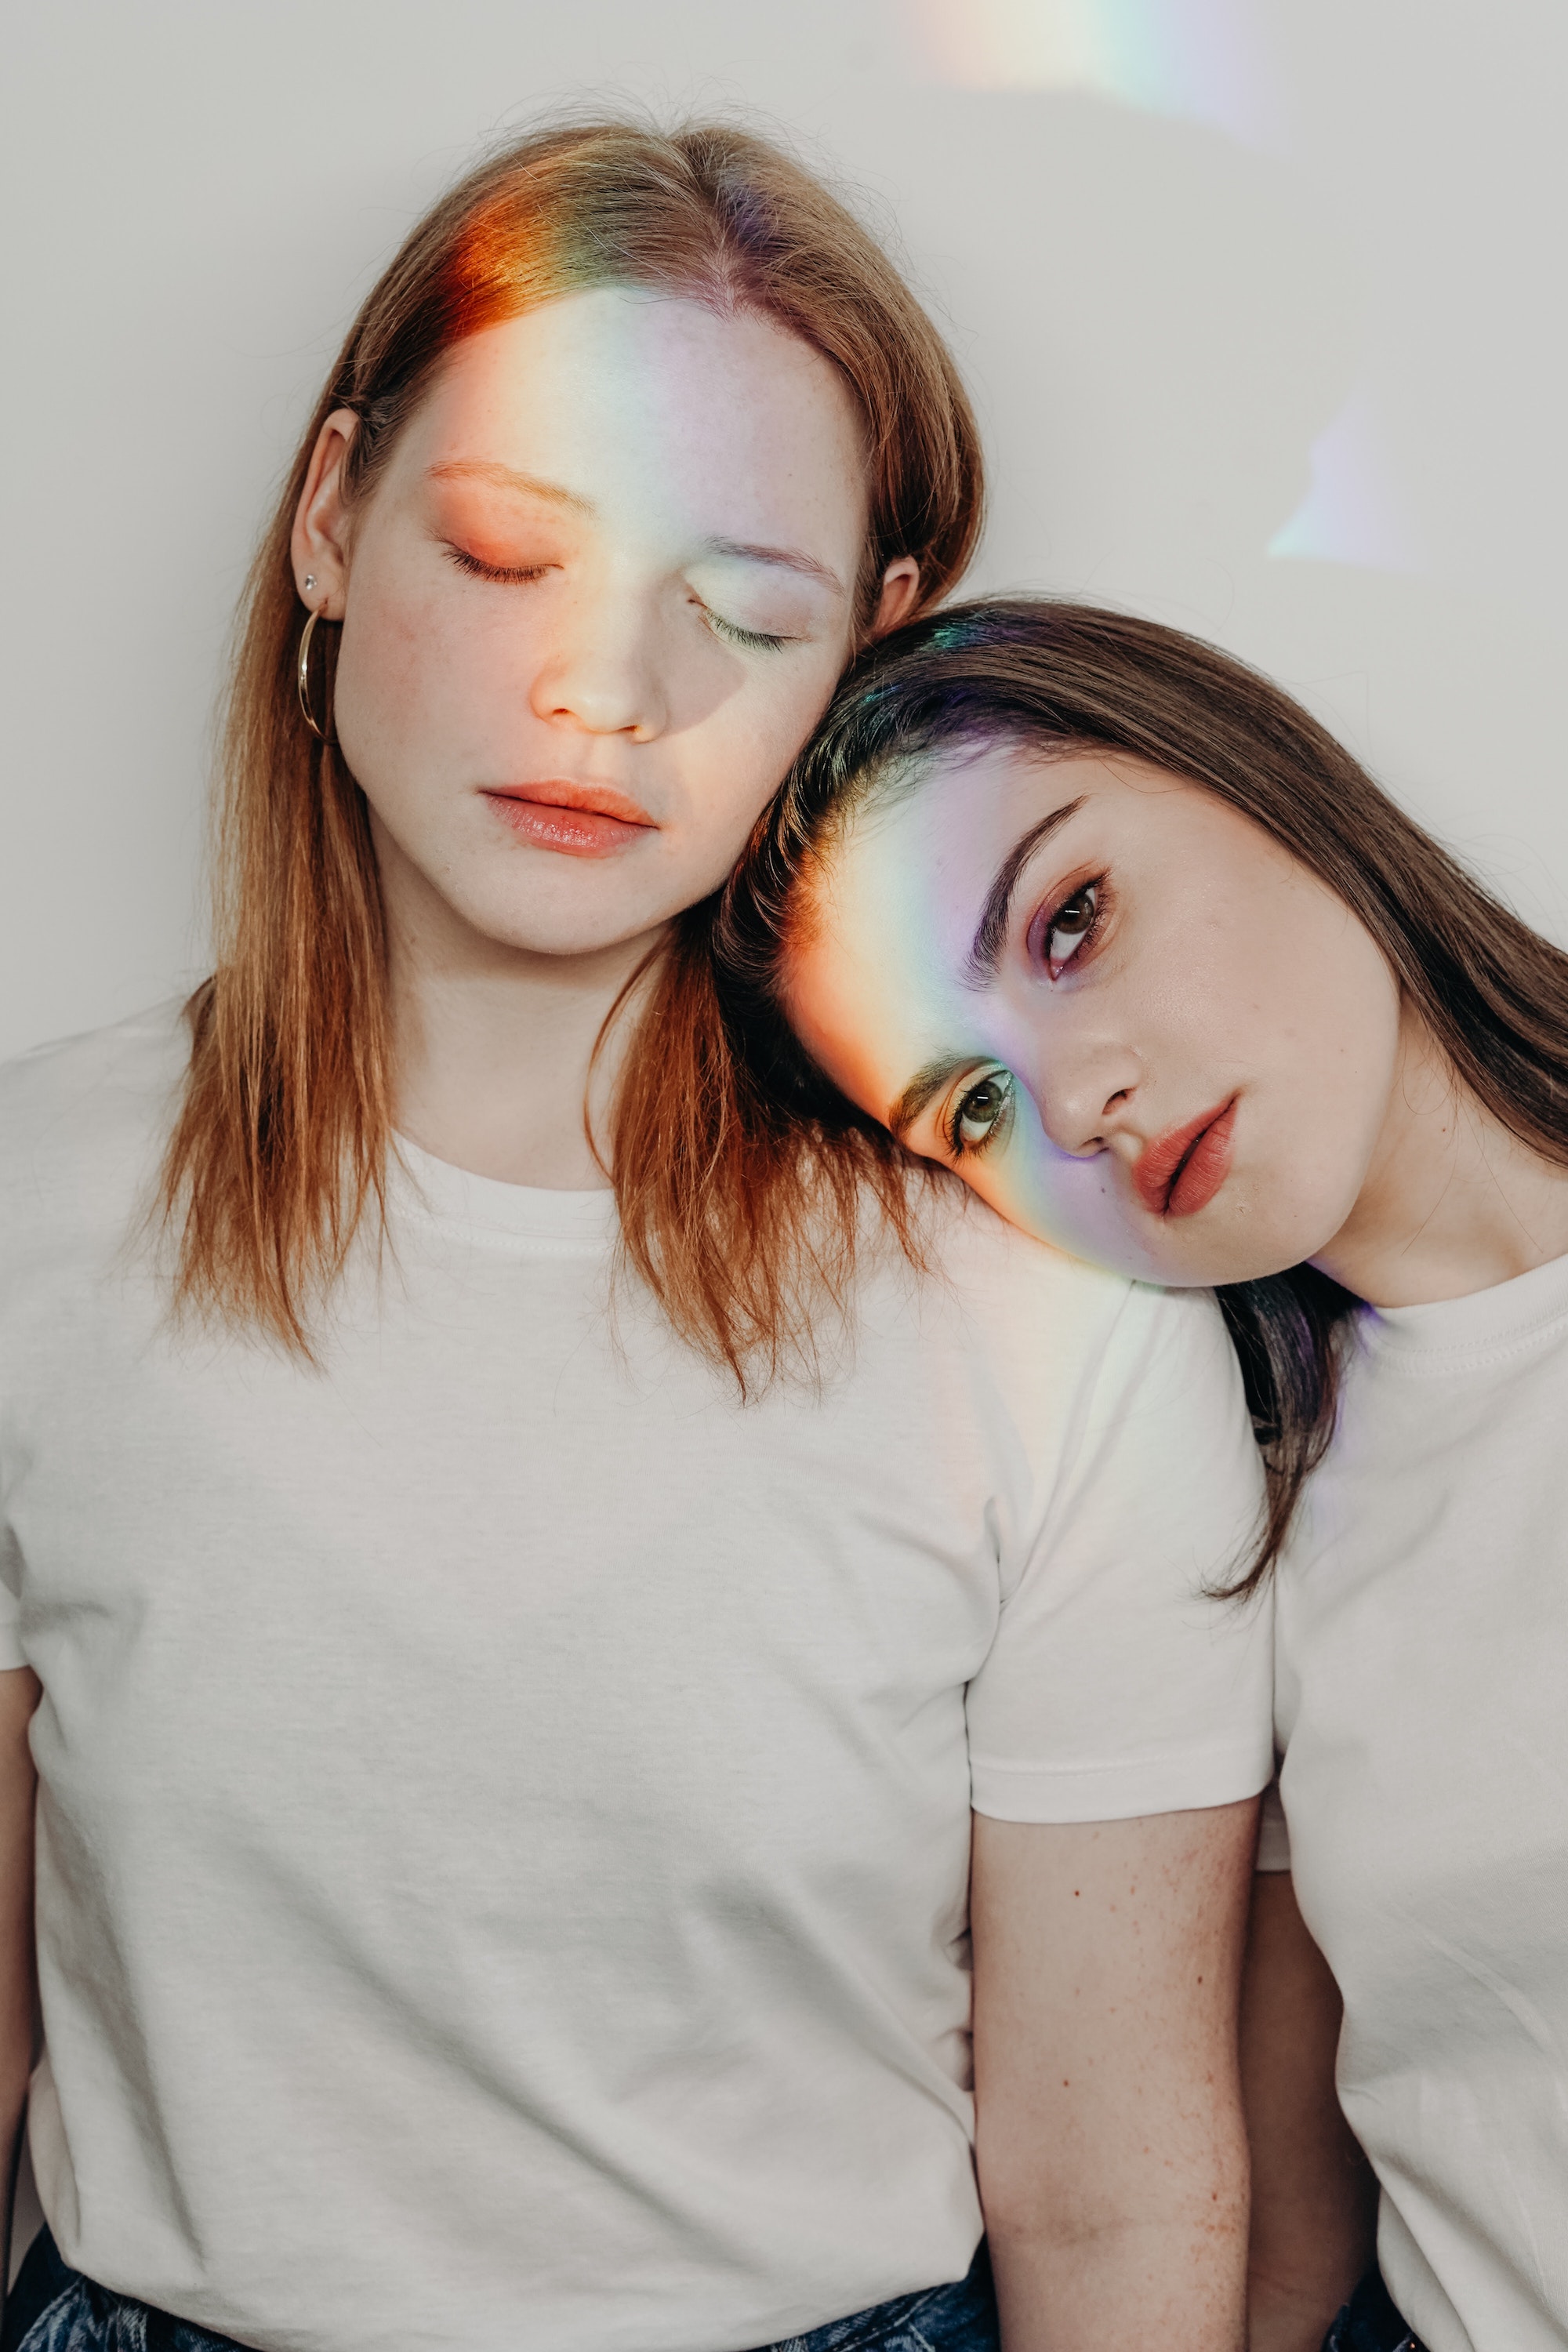 <p><b></b></p>

<p><span>Sonya Svinopanda, photographed here with her girlfriend Nika, is an actress and blogger who writes about body positivity, feminism, and LGBTQ+ representation. Her openness about her daily life has helped to create a new visual language for queer intimacy and love in Russia. </span></p>